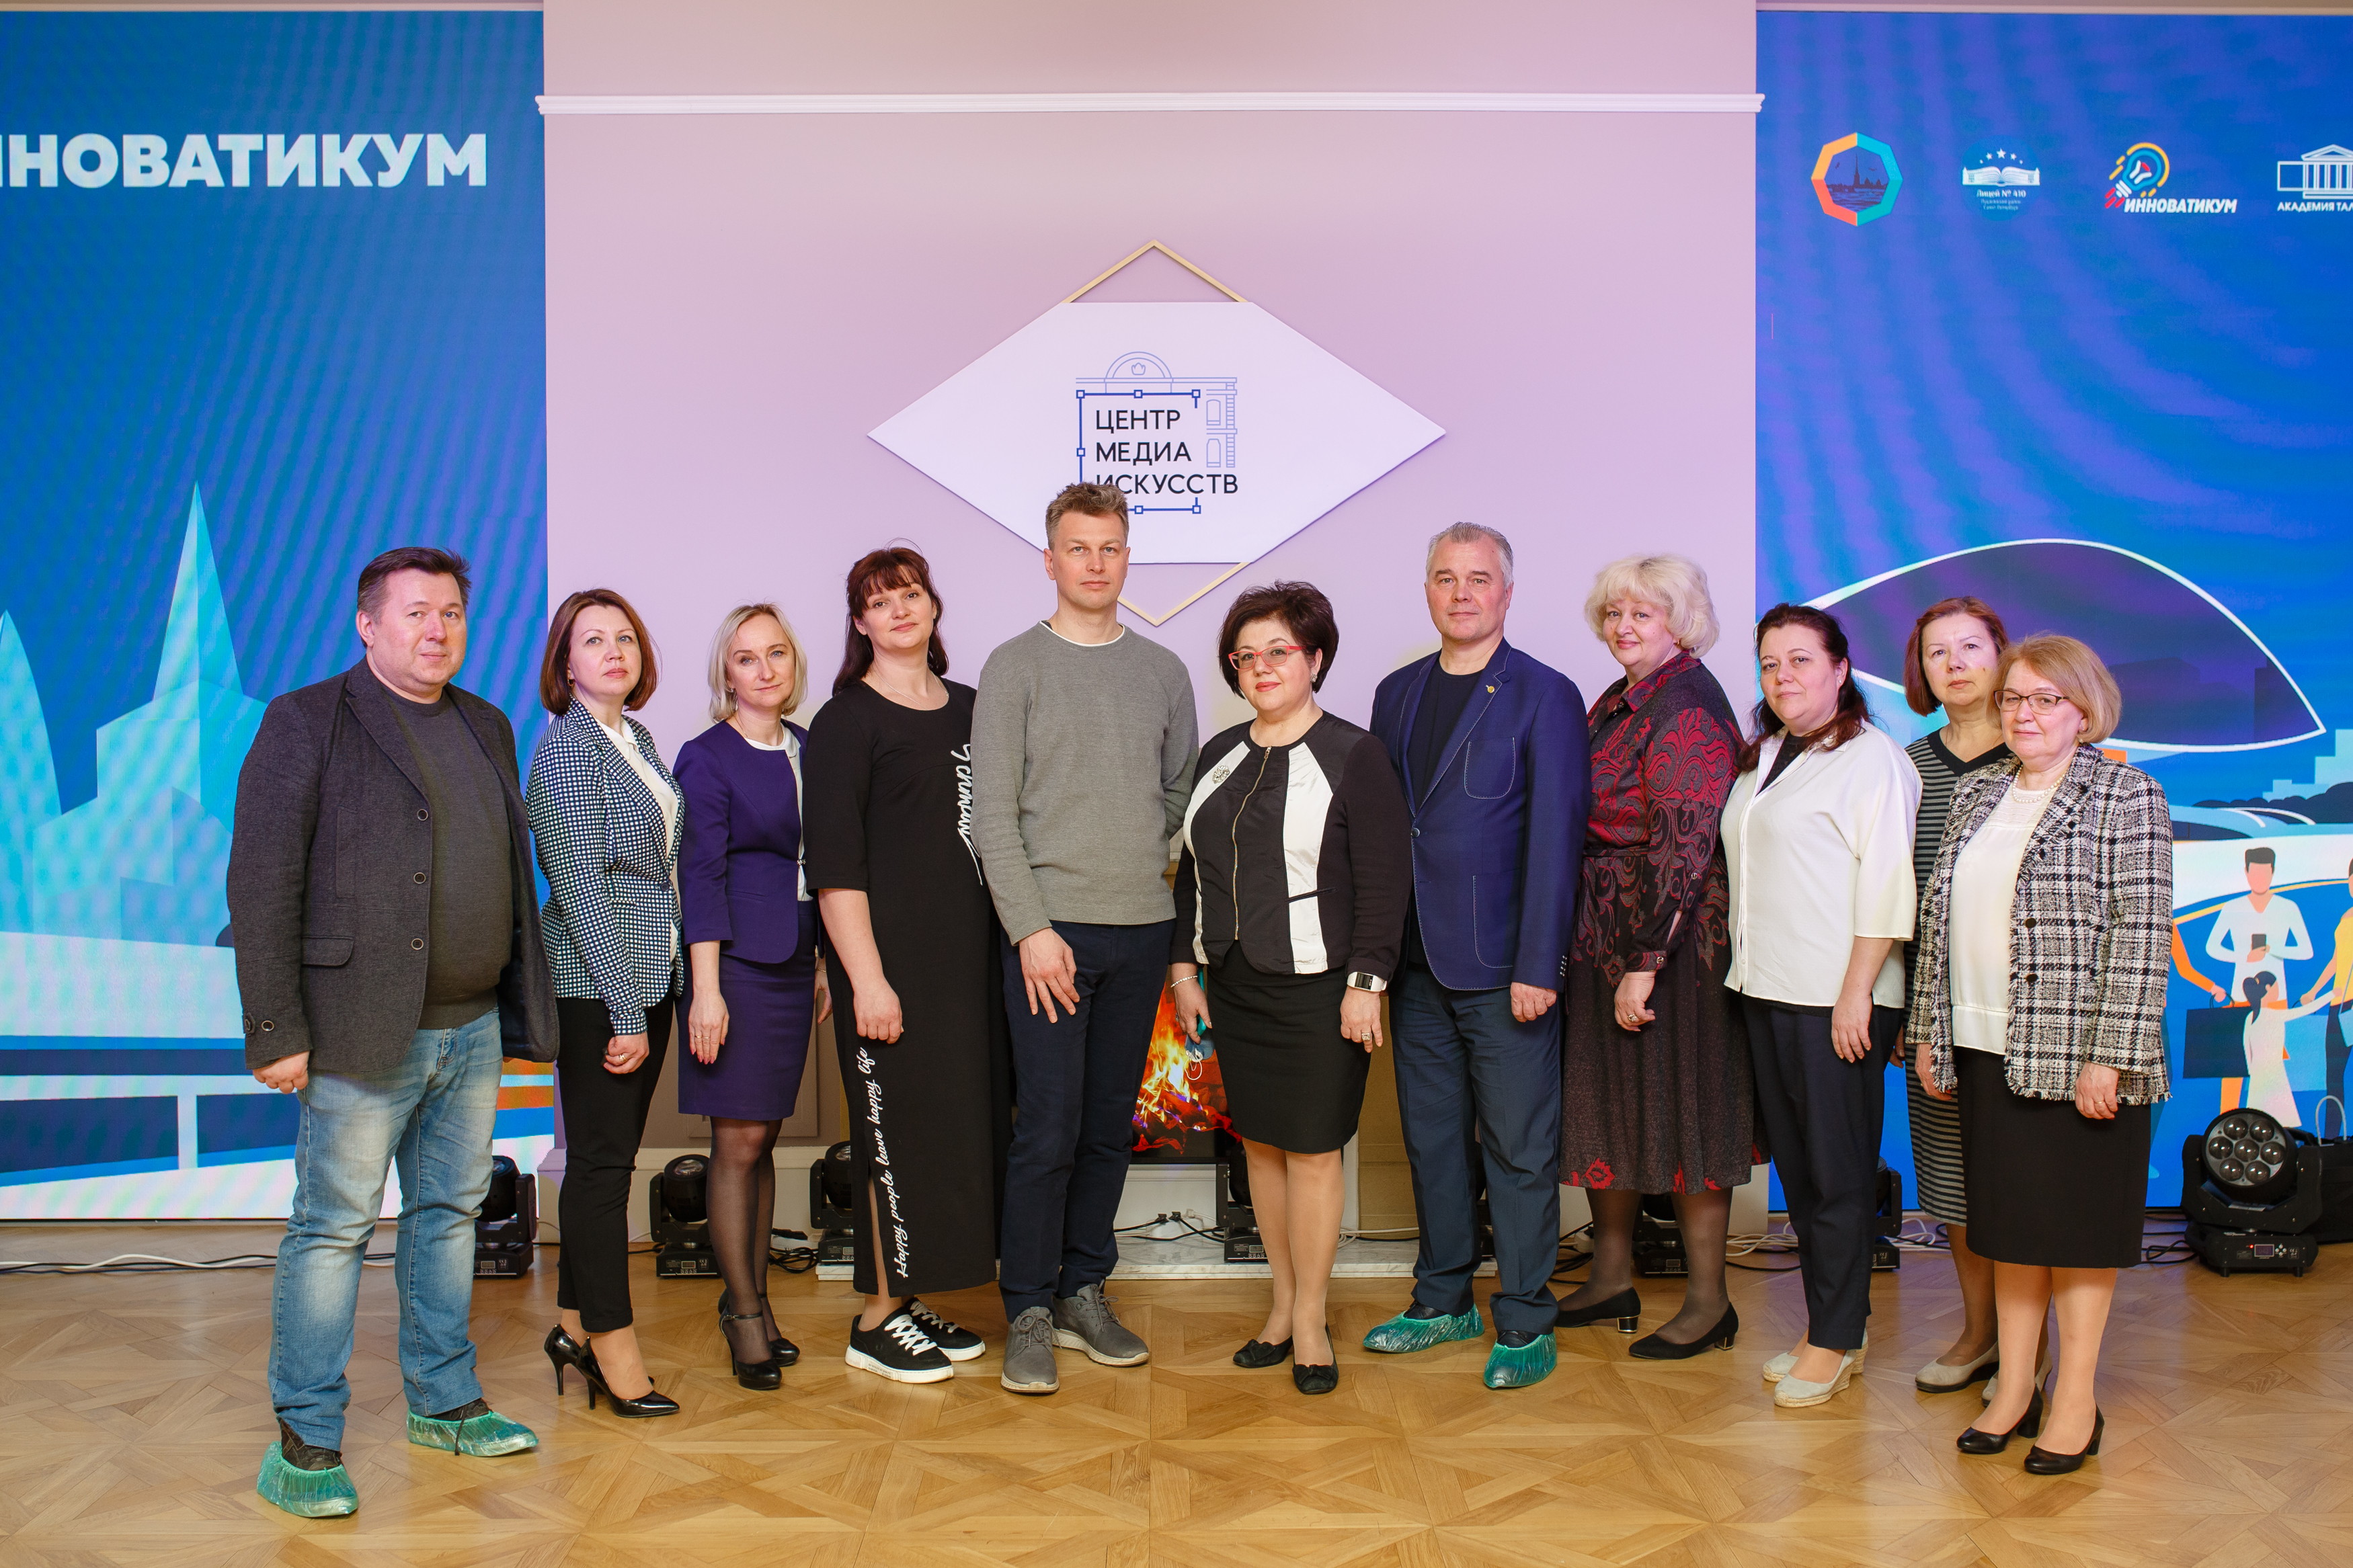 The "Innovatikum" forum brought together teams of schoolchildren from 11 regions of the country